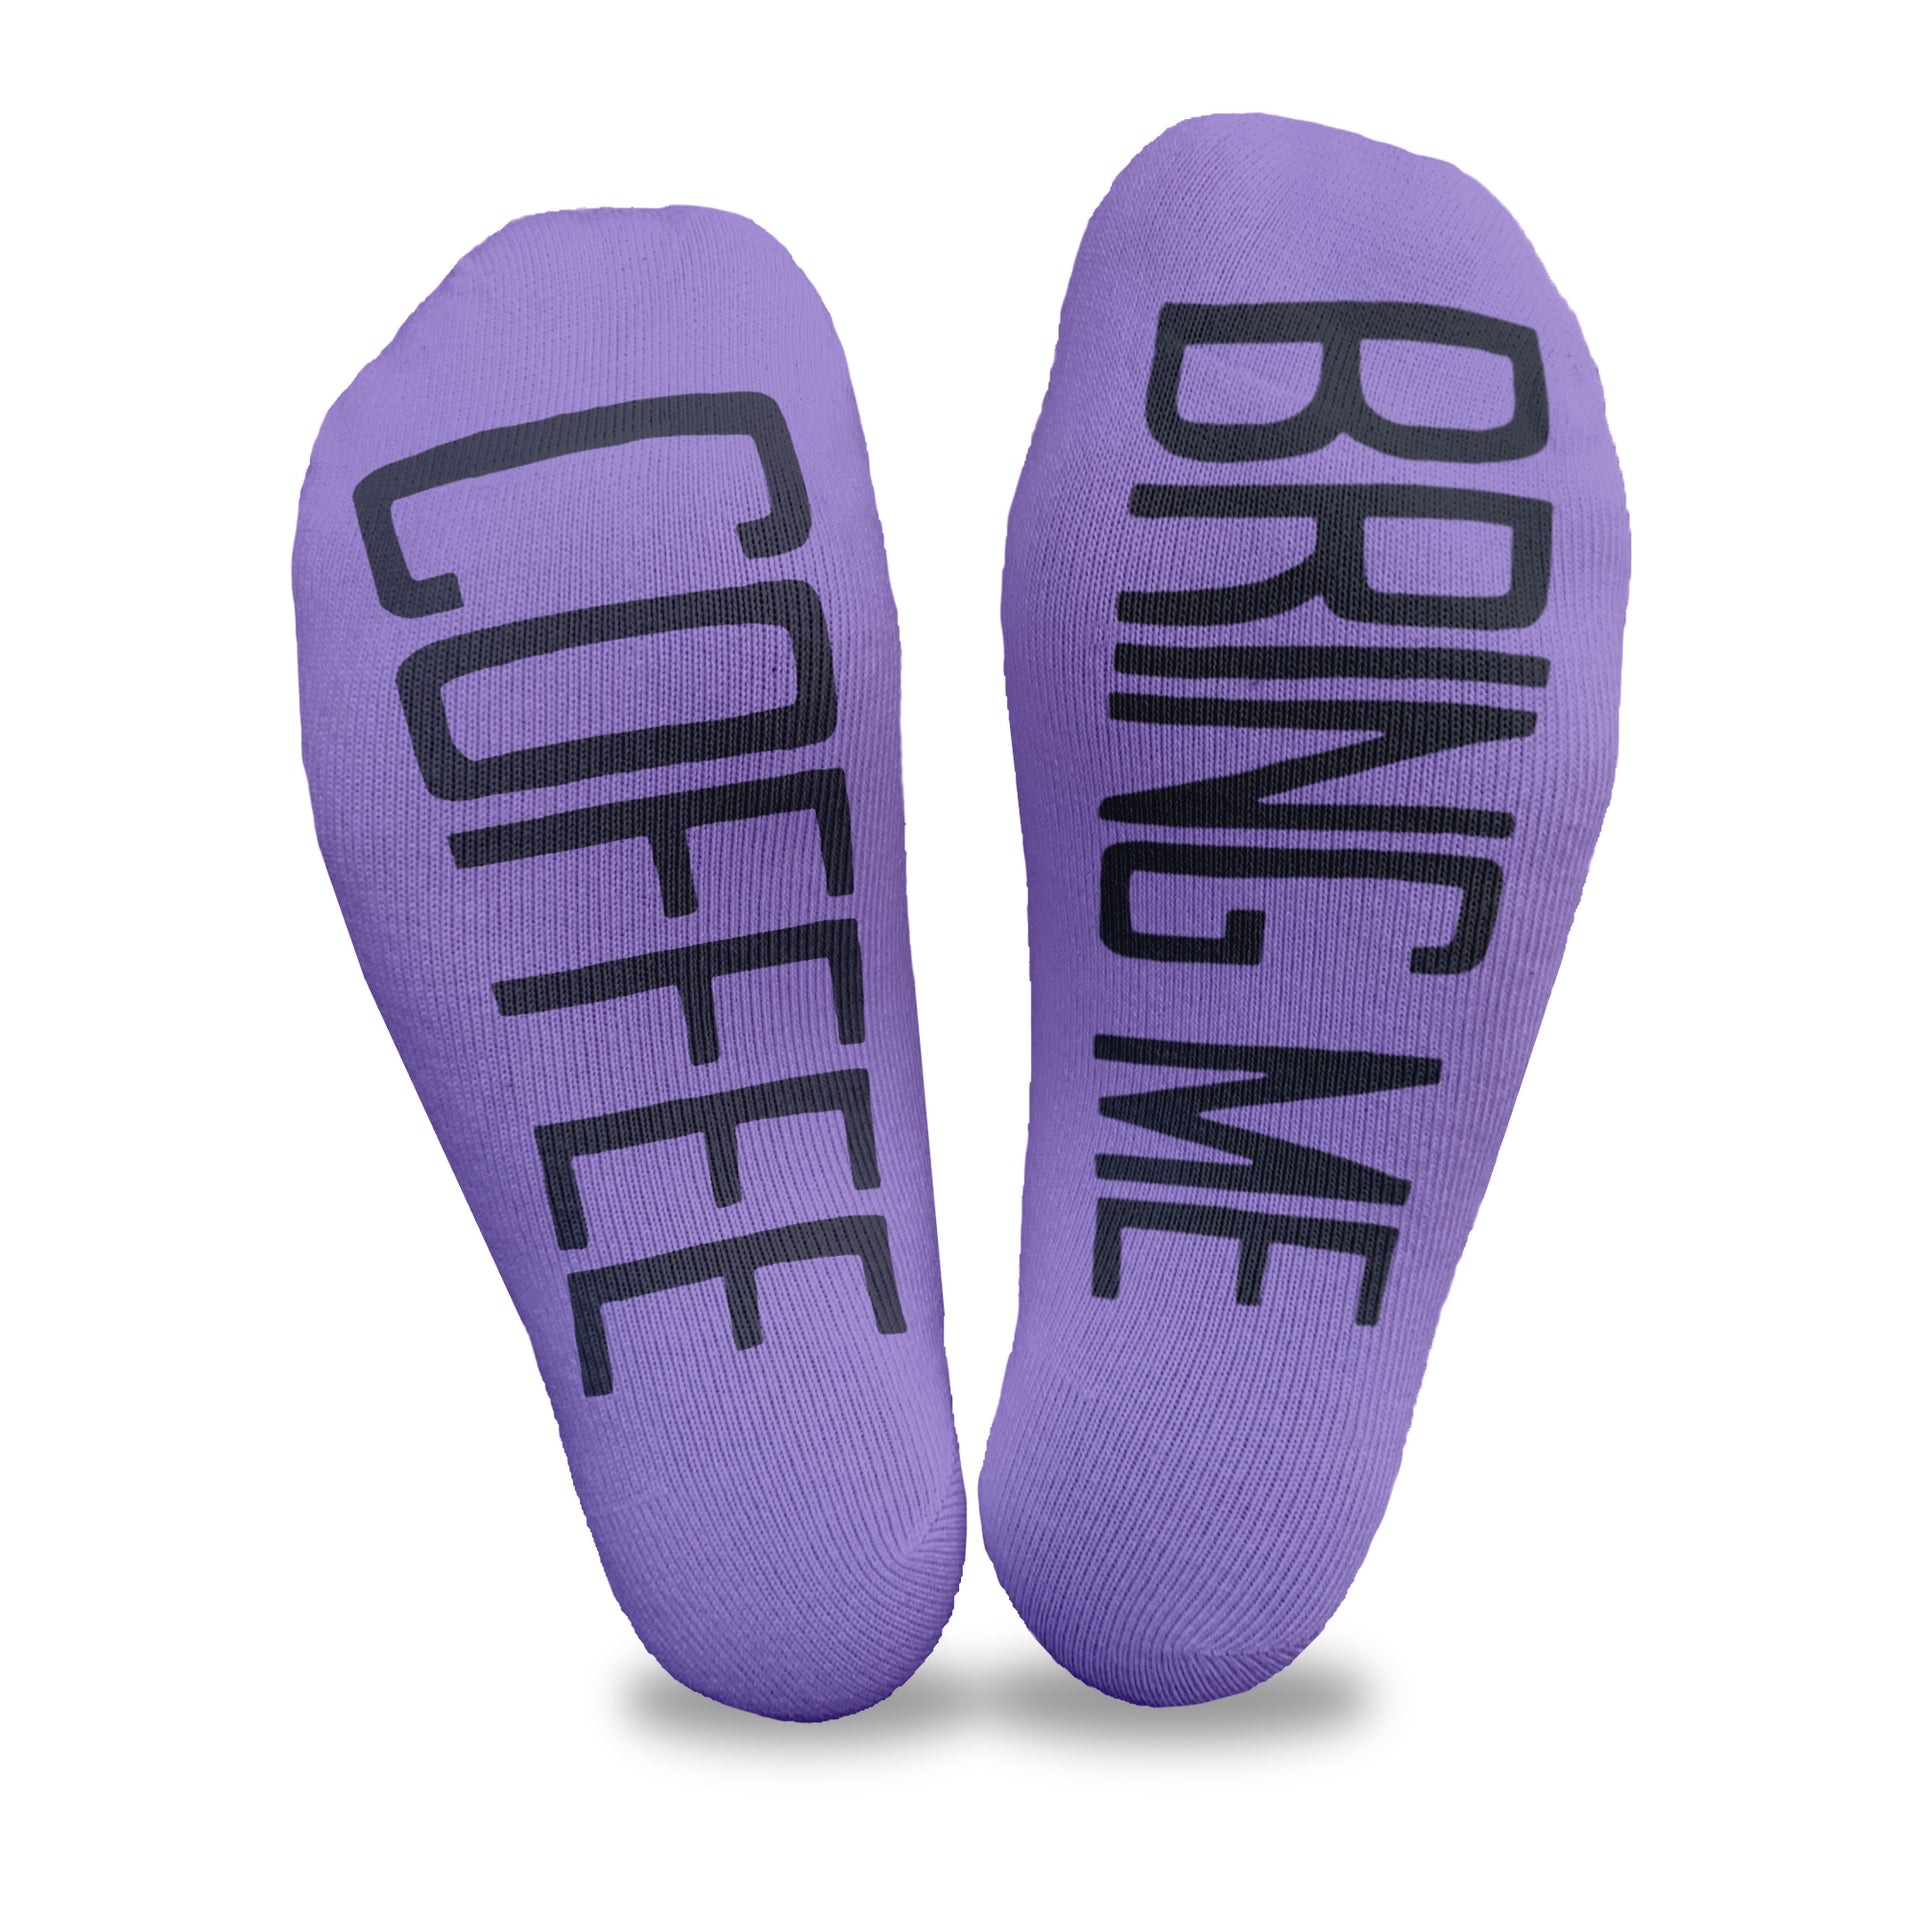 Bring me coffee custom printed in black ink on the bottom soles of purple no show socks is a great way to get your spouse to bring you coffee in the morning.